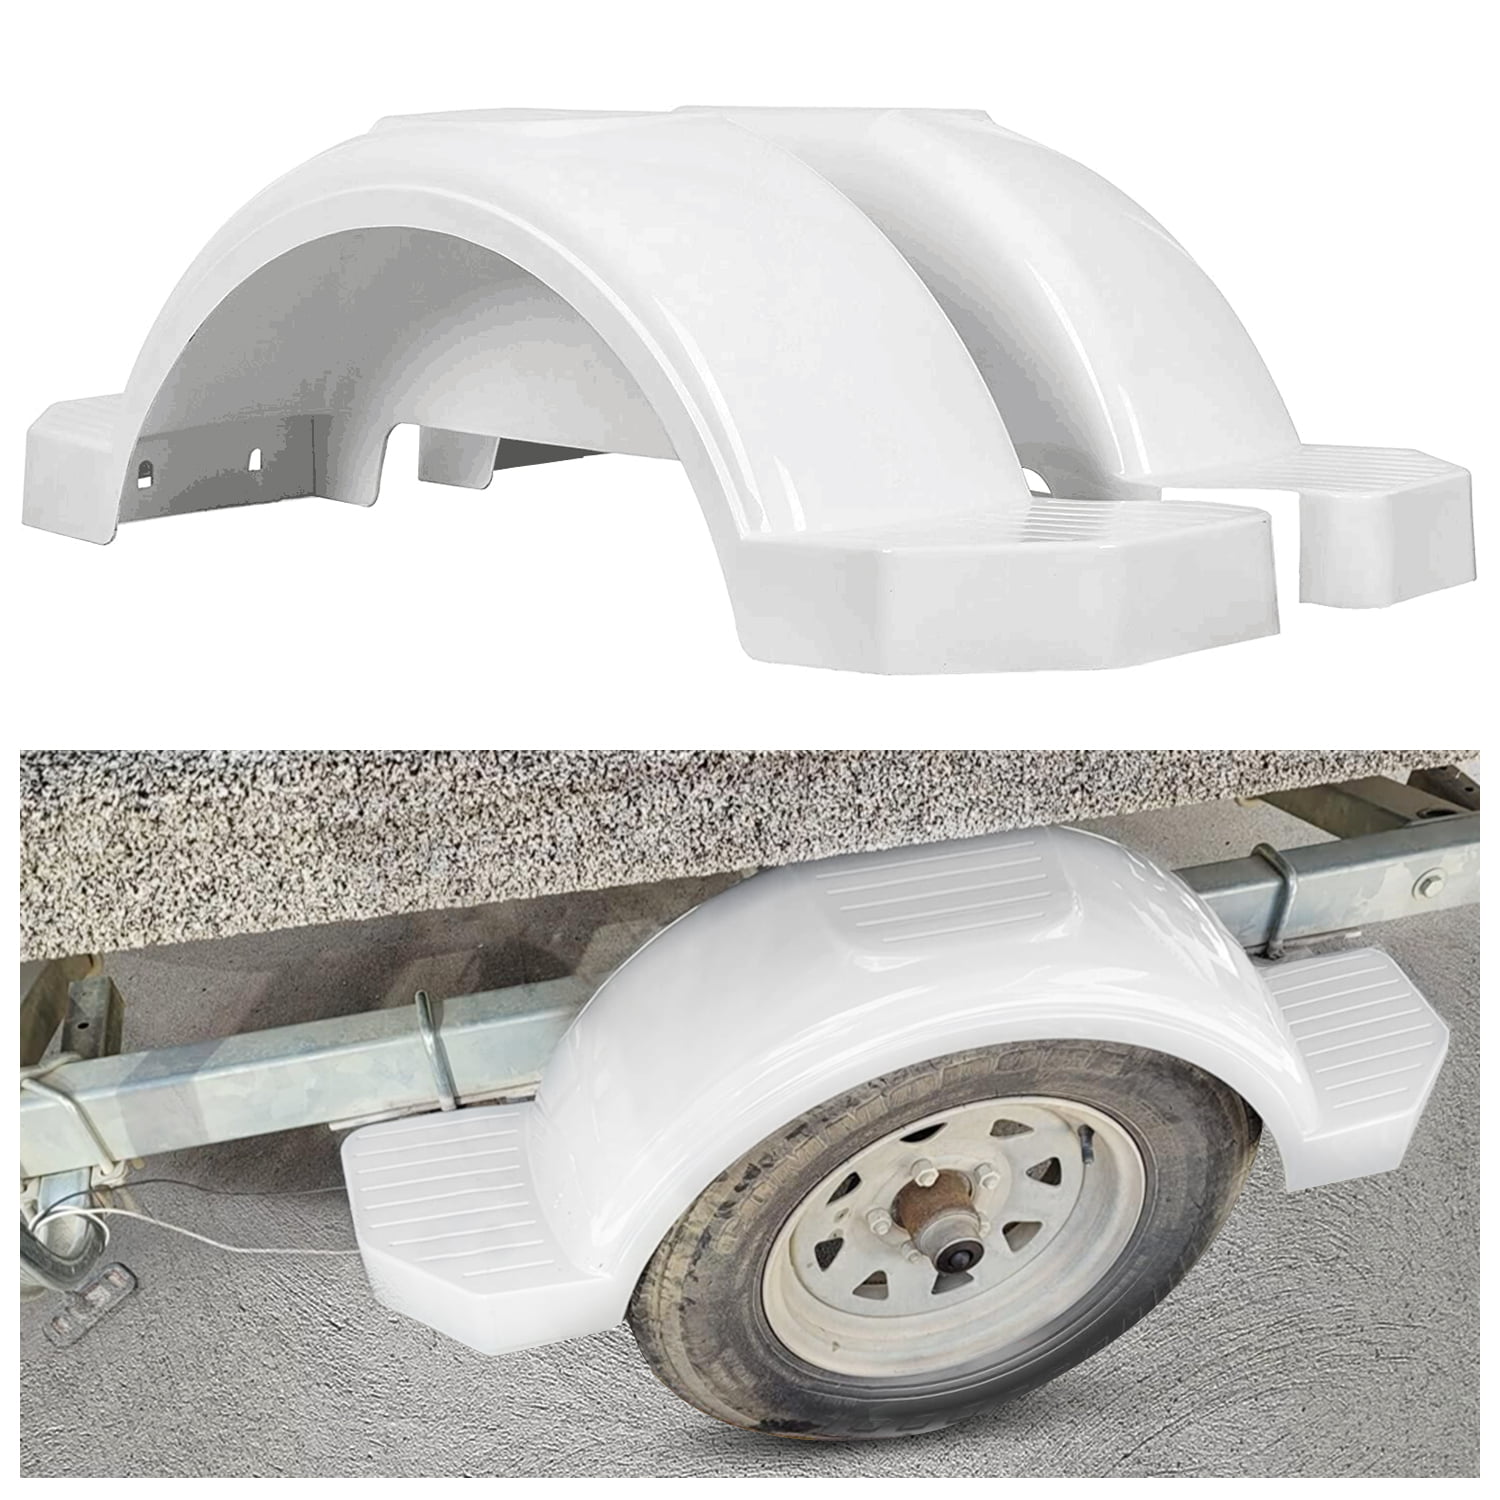 HECASA White Pair of Single Axle Trailer Fenders Fits 13 Wheels Tire Skirt Boat 39.7 Long x 8.8 Wide x 11.4 